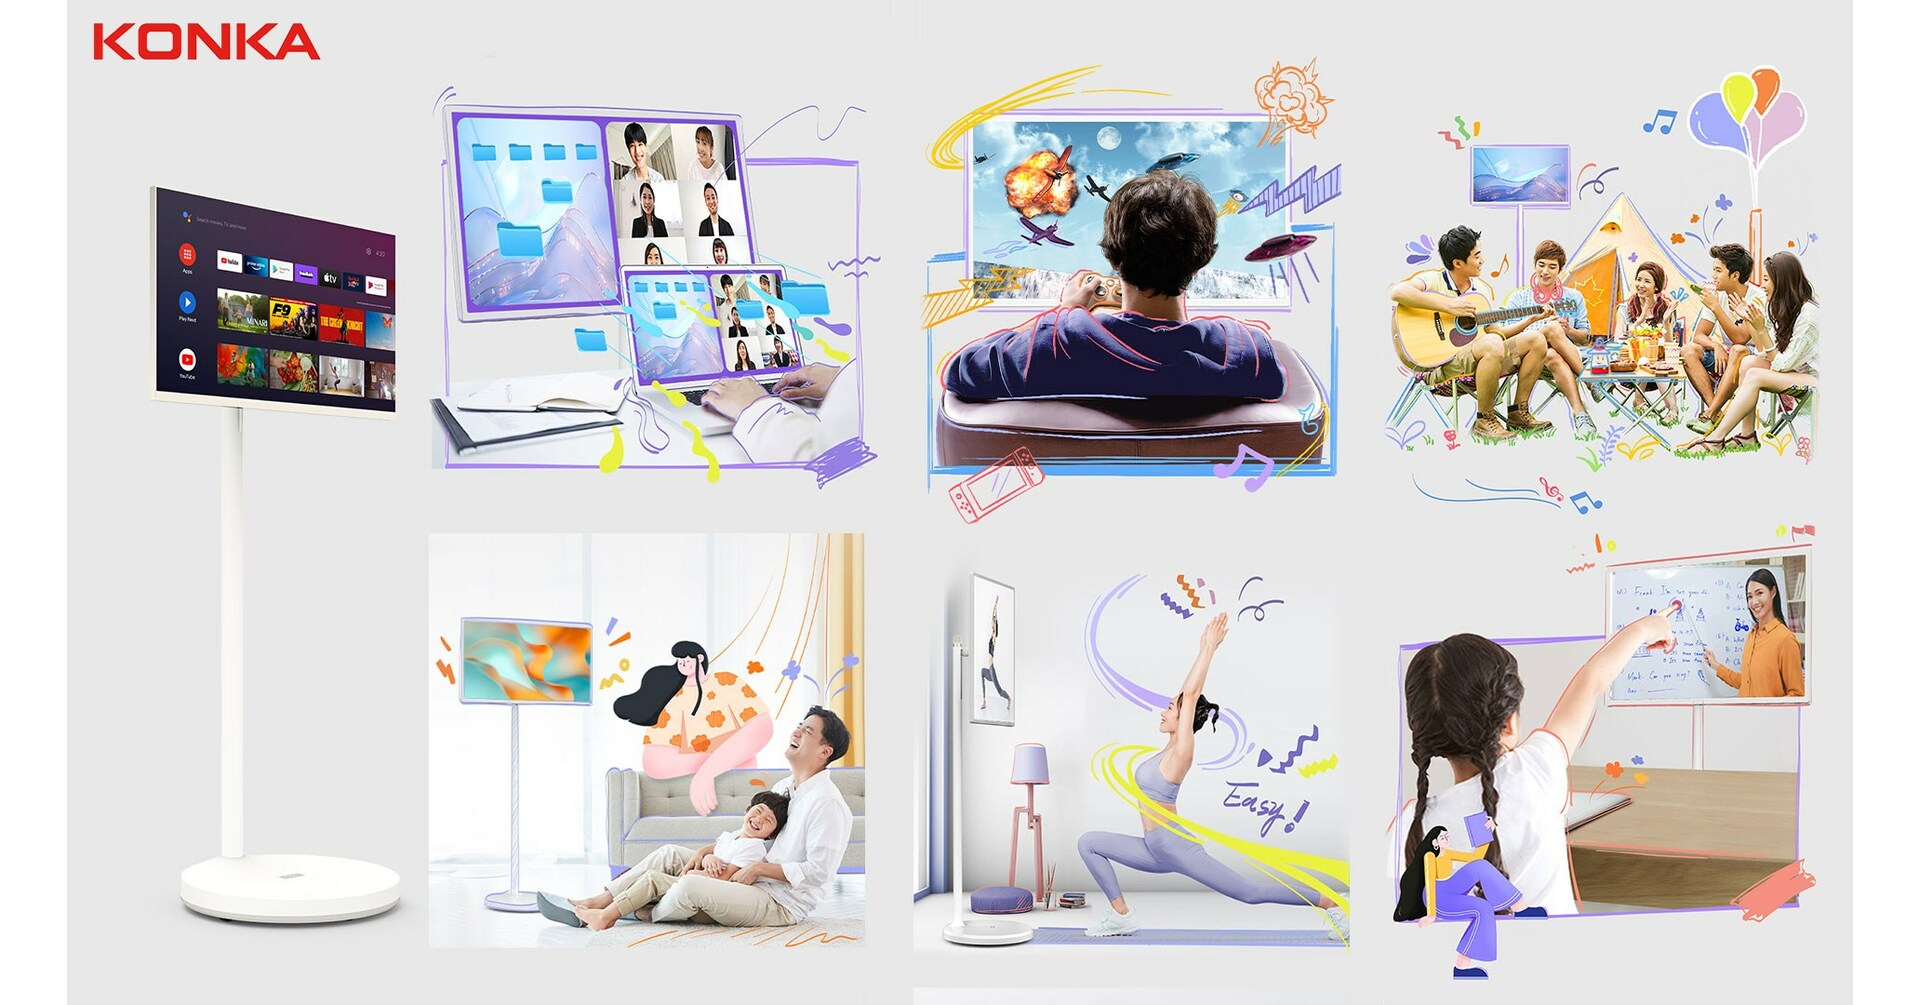 Konka launches 27-inch cordless smart display in Japanese market